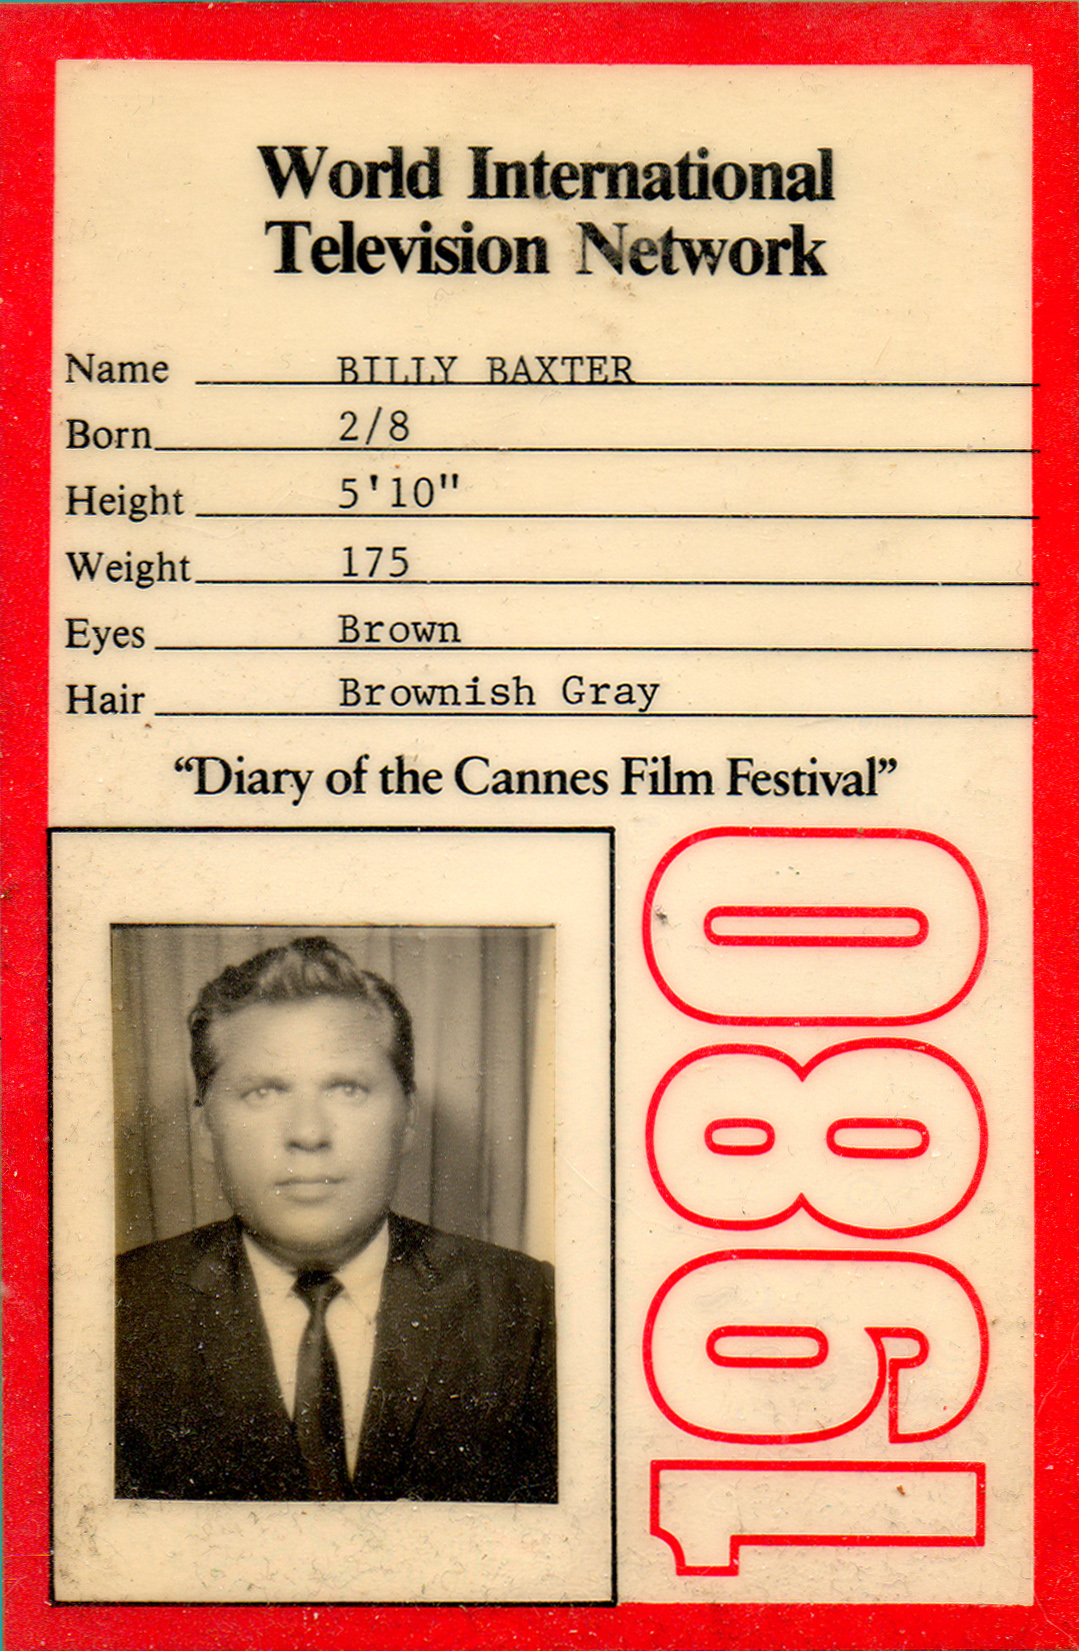 Billy 'Silver Dollar' Baxter's "Credentials" for 1980 Cannes Film Festival